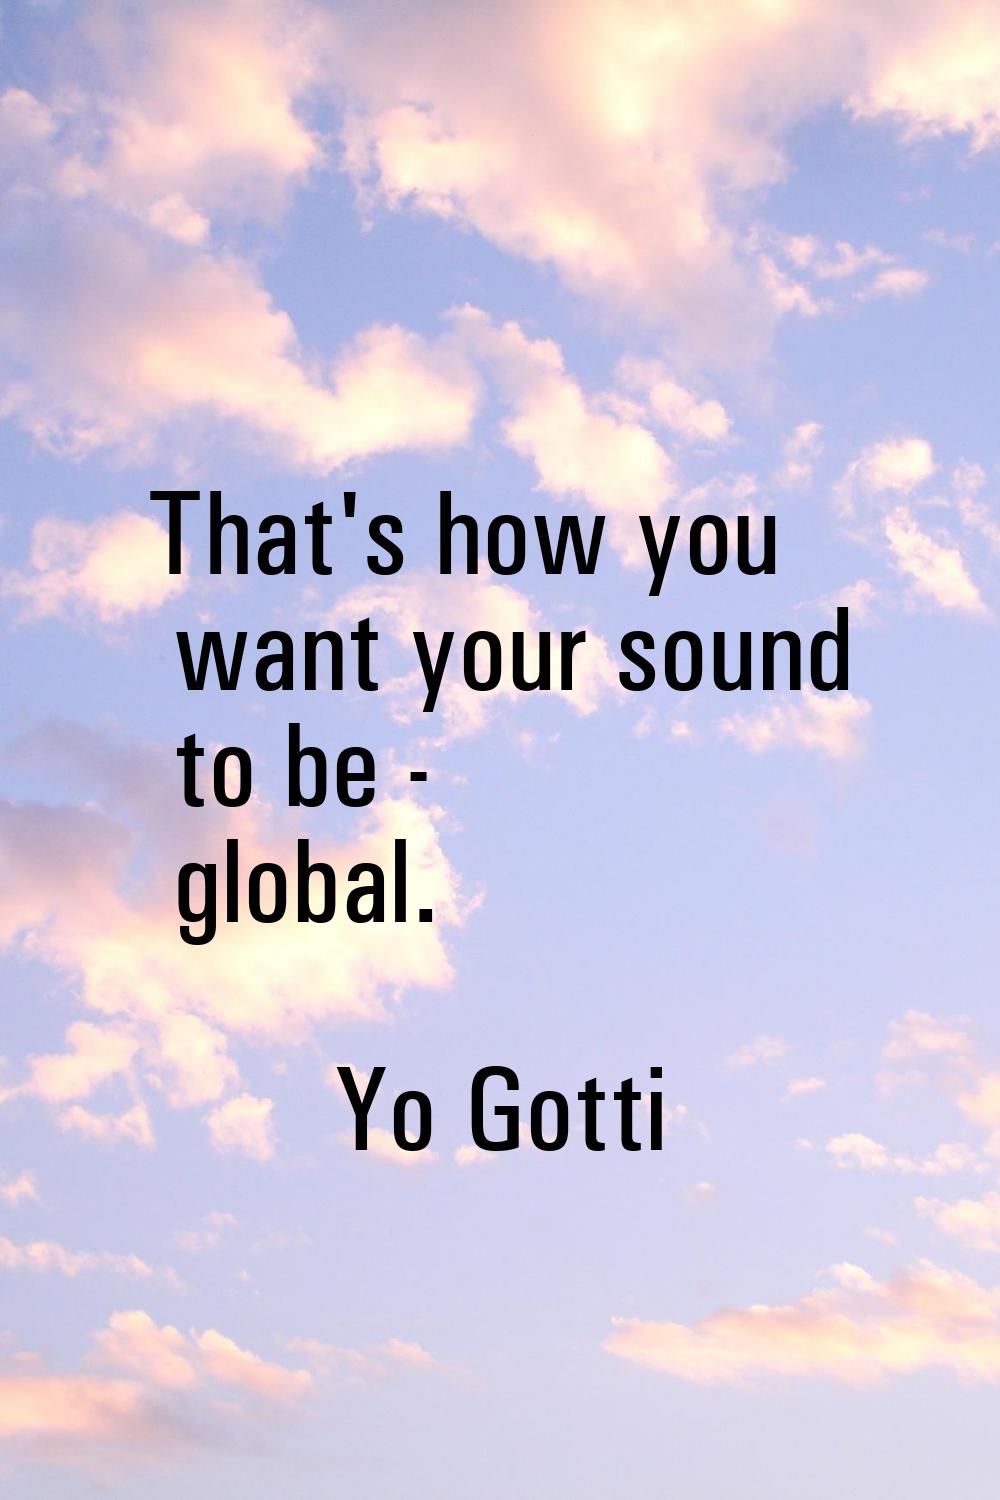 That's how you want your sound to be - global.